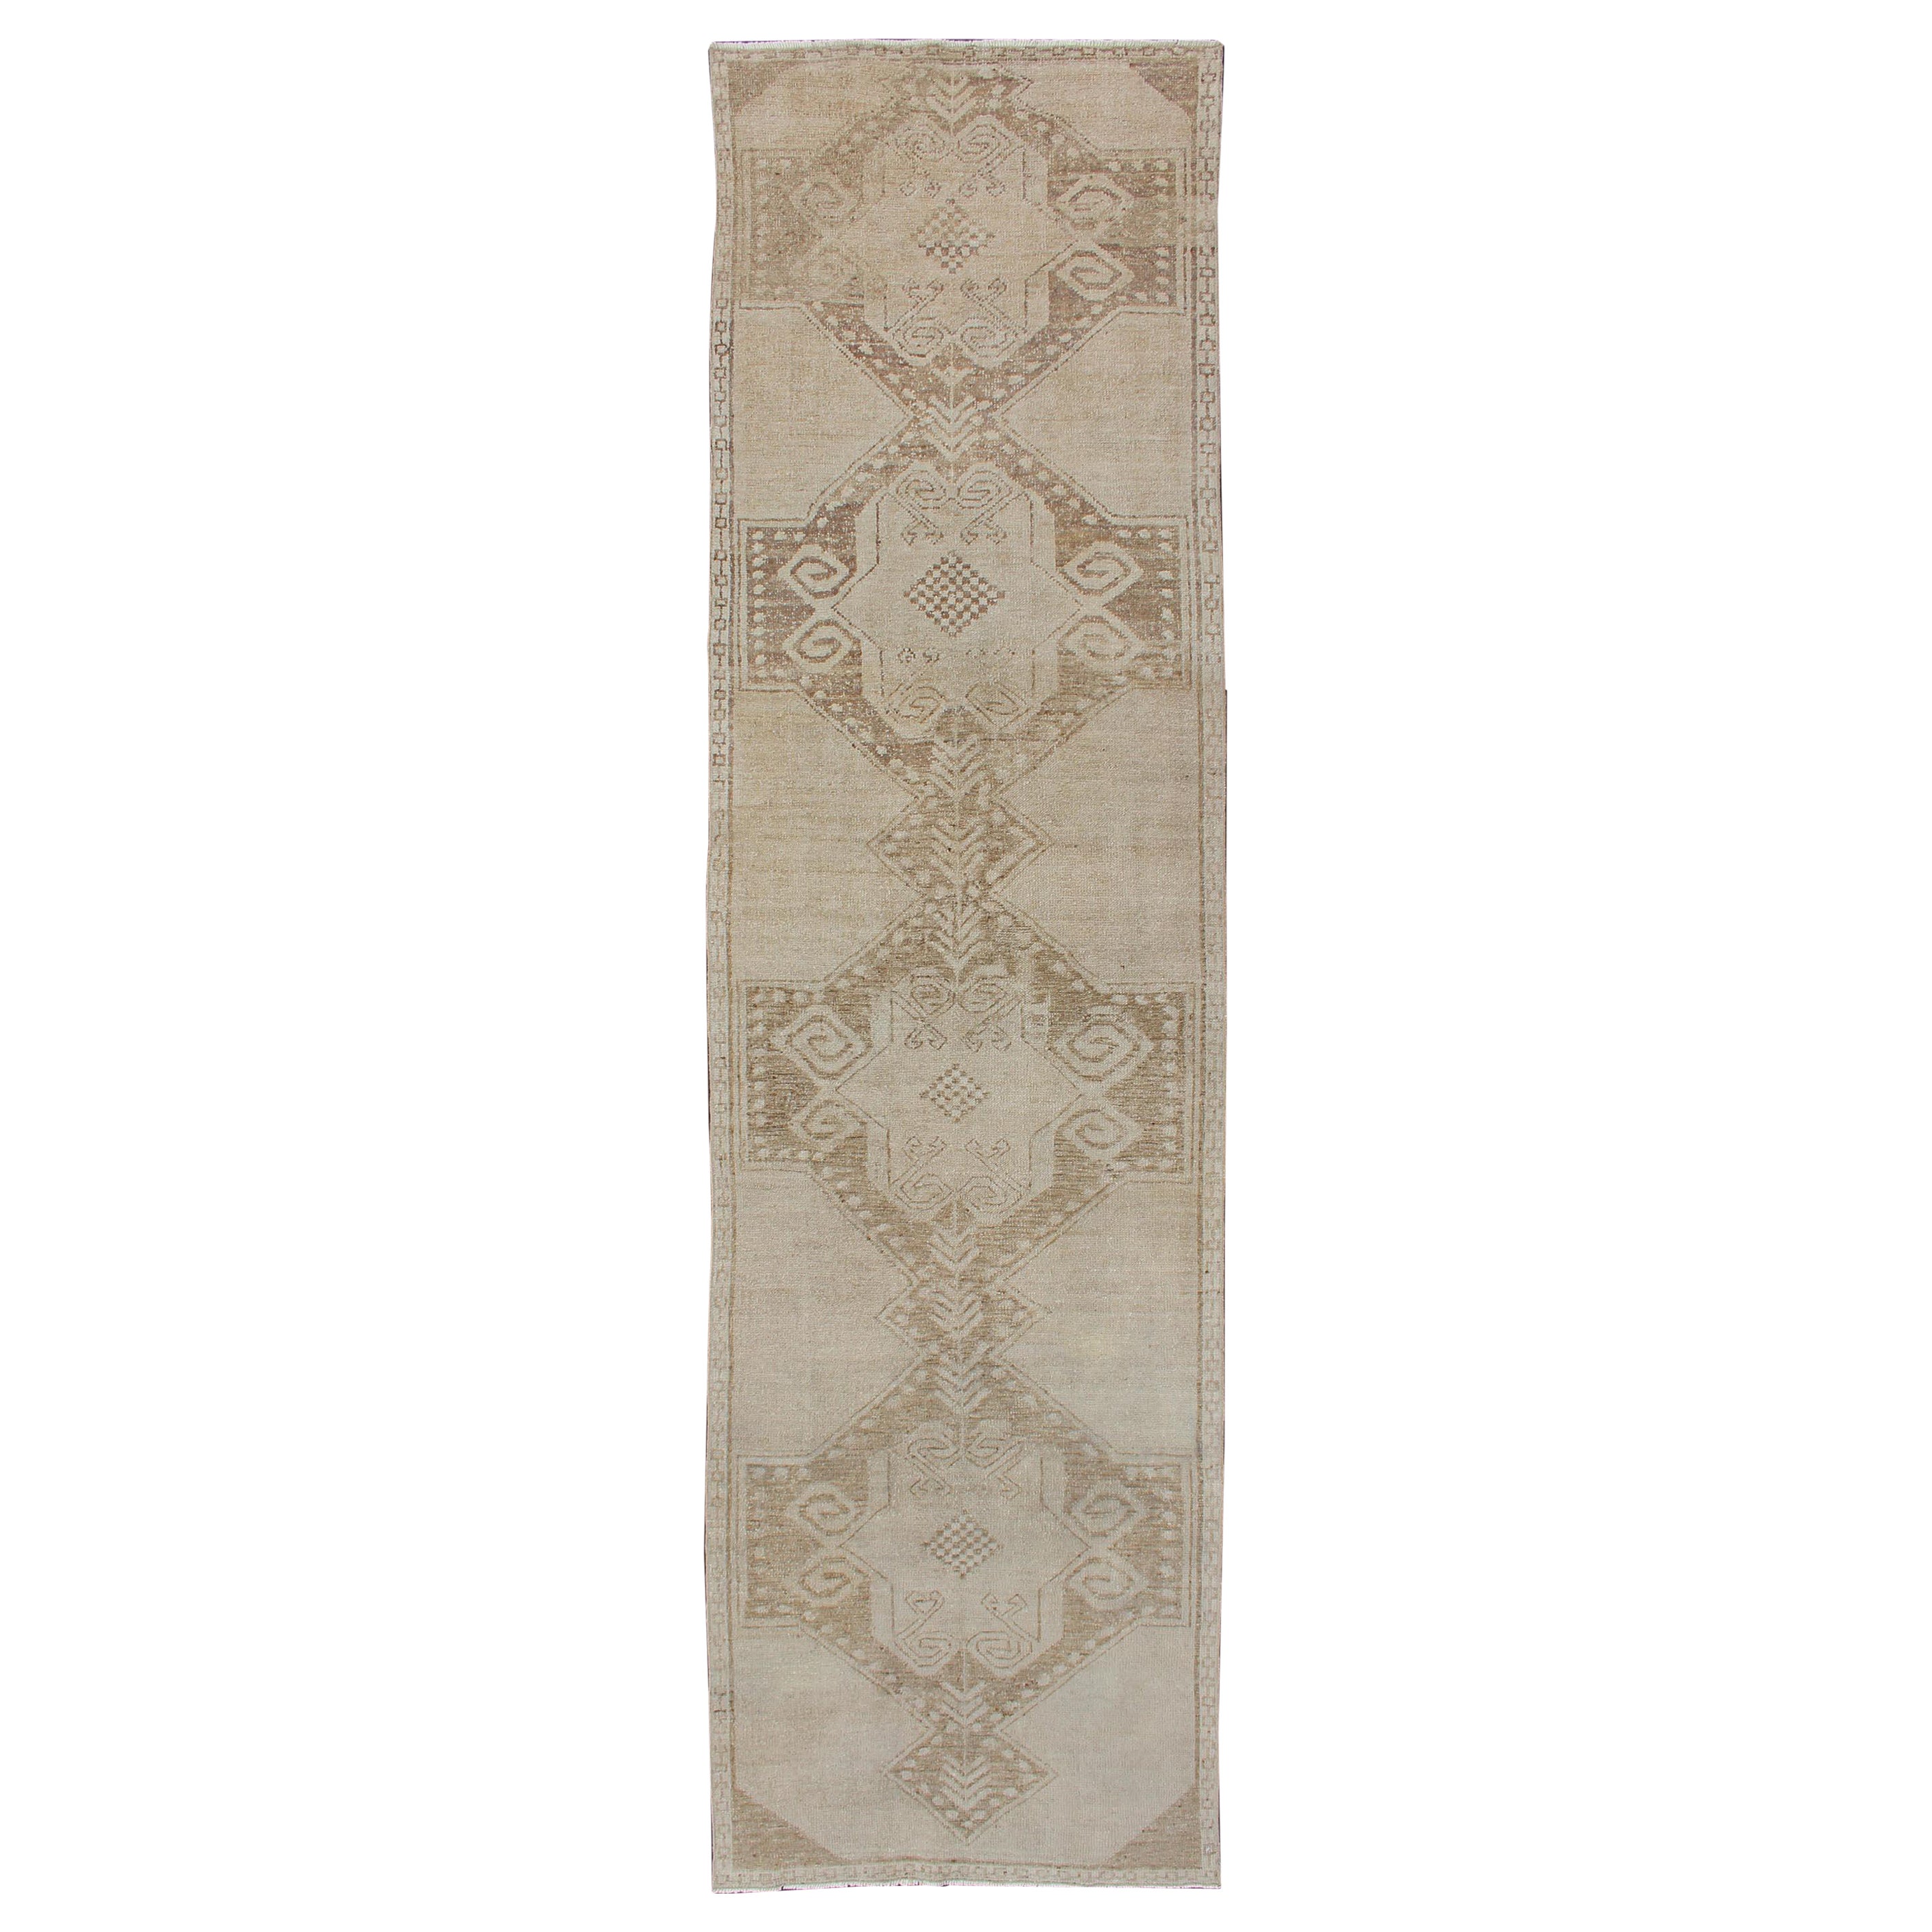 Vintage Turkish Oushak Runner with Medallions in Taupe, Tan, and Browns